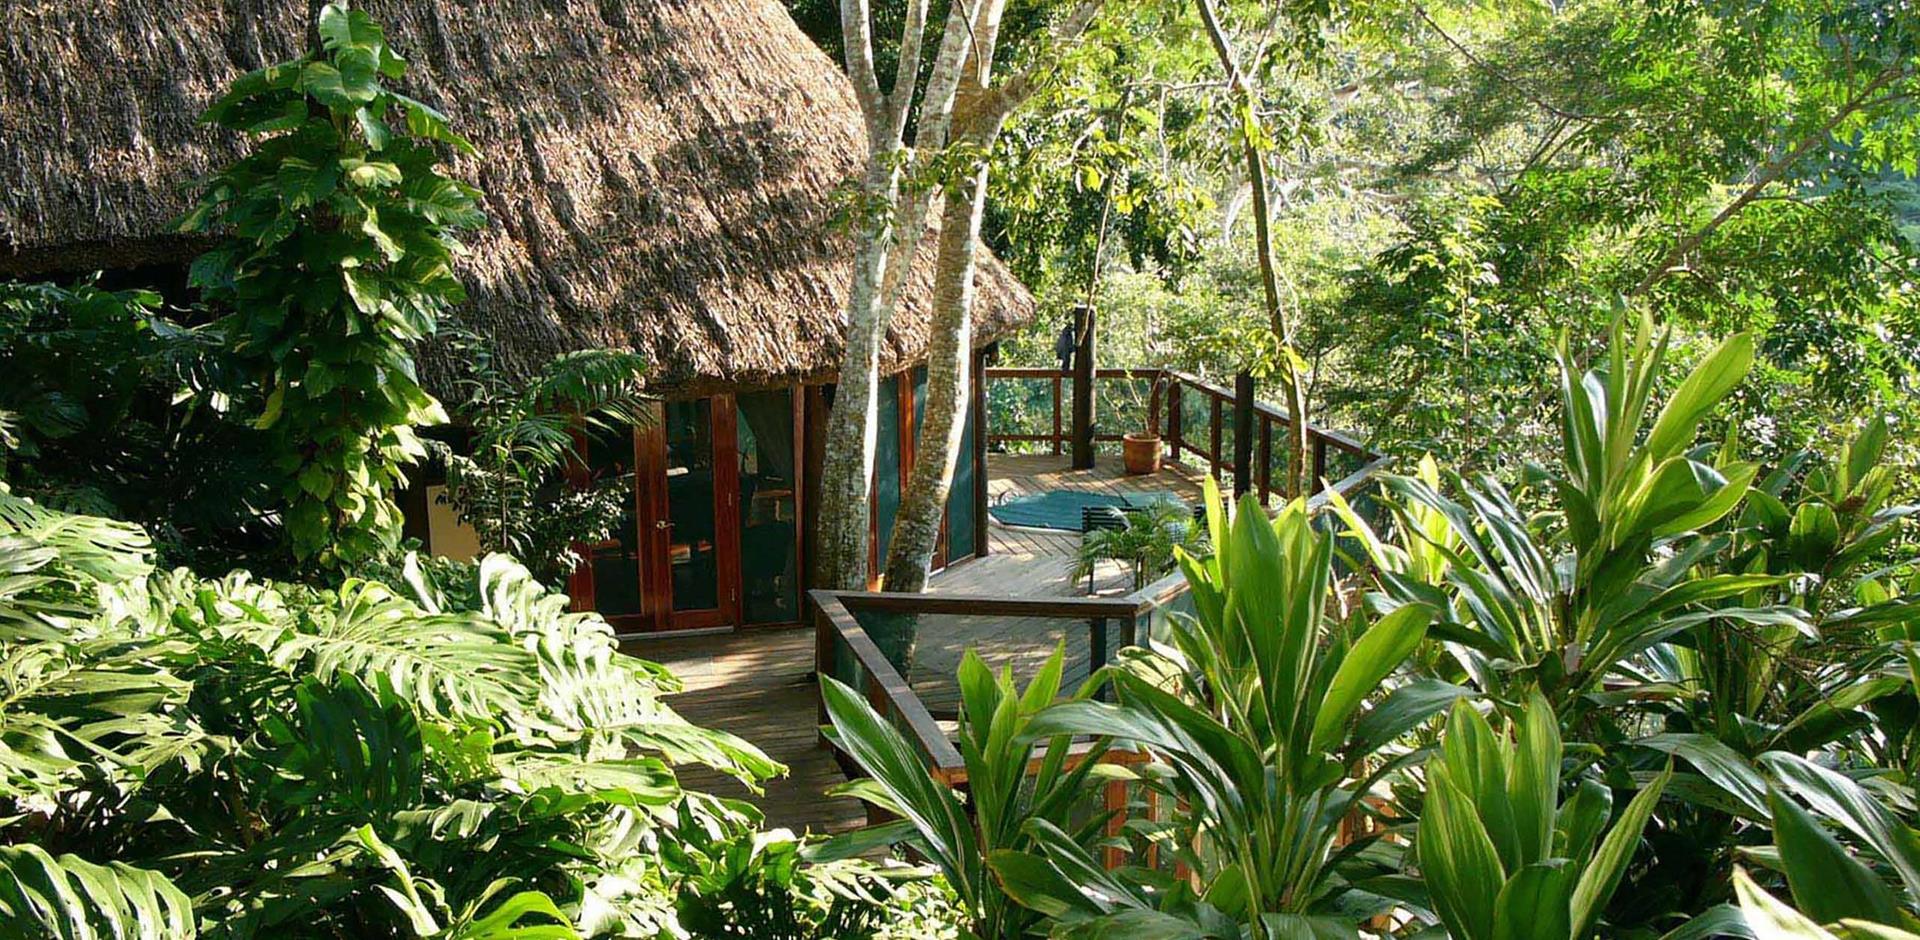 The Lodge at Chaa Creek, Belize, A&K